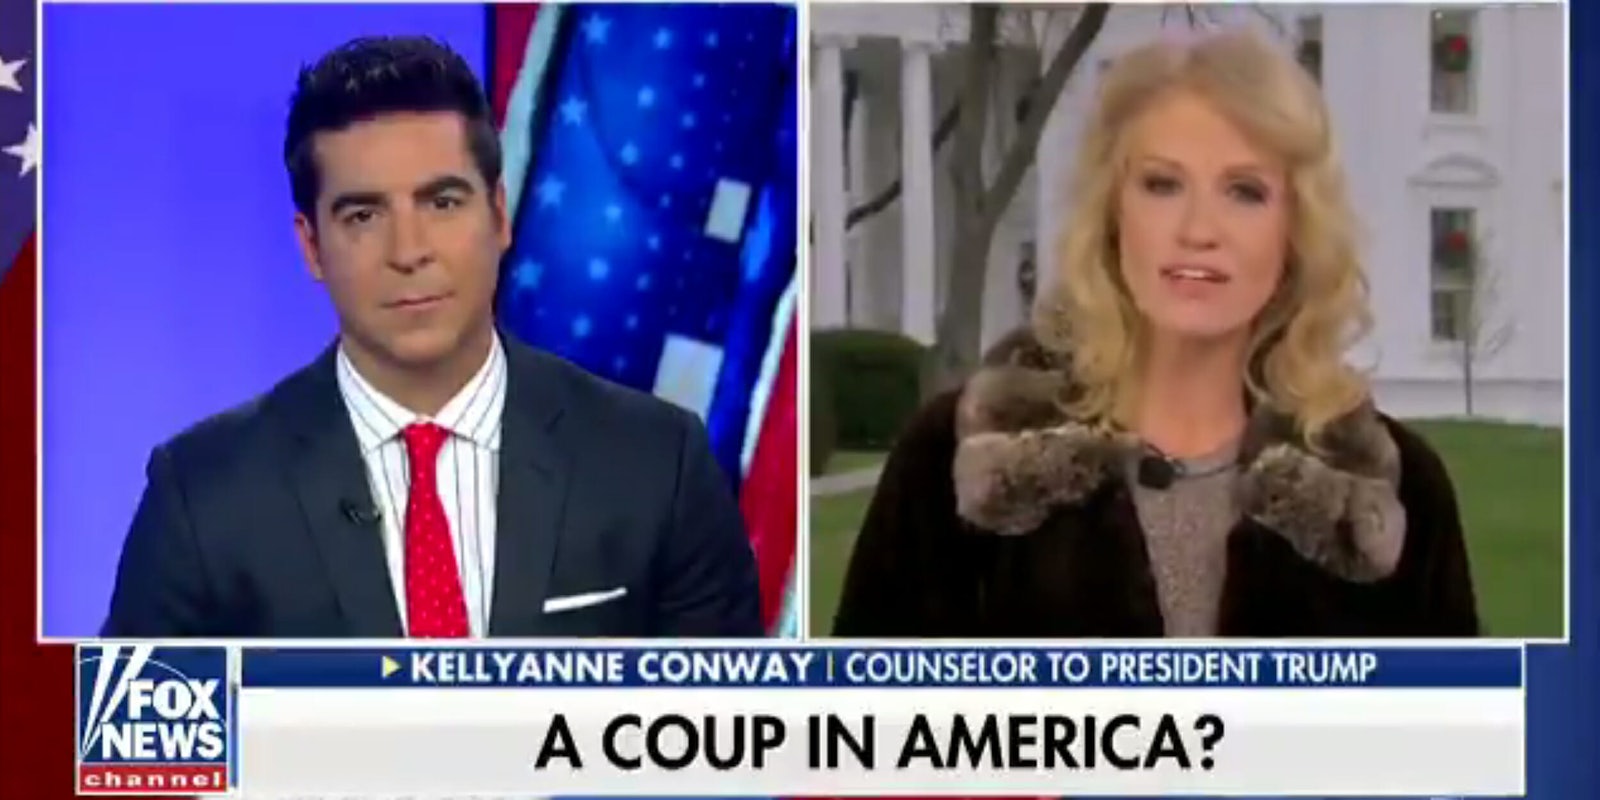 Fox News is coming under fire after host Jesse Watters interviewed Kellyanne Conway about a 'coup' in America as a result of Robert Mueller's investigation.